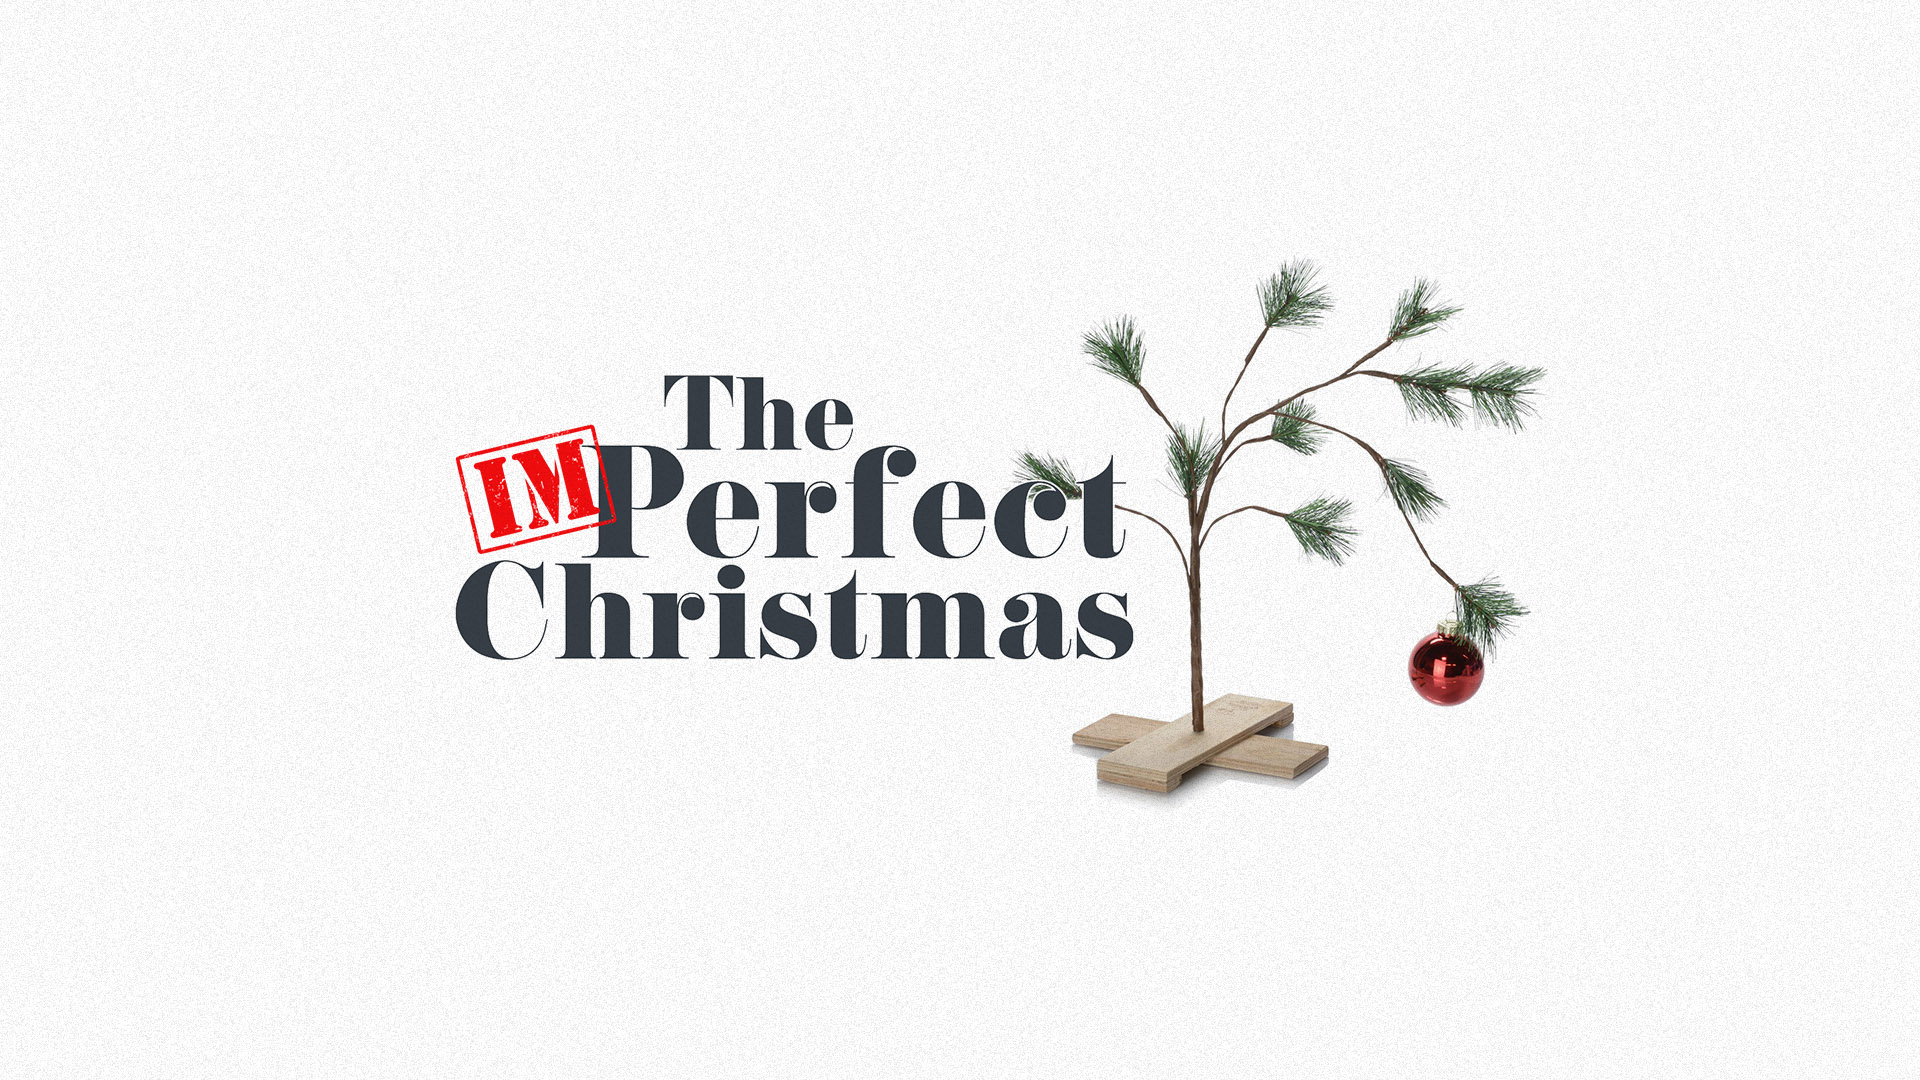    The Imperfect Christmas